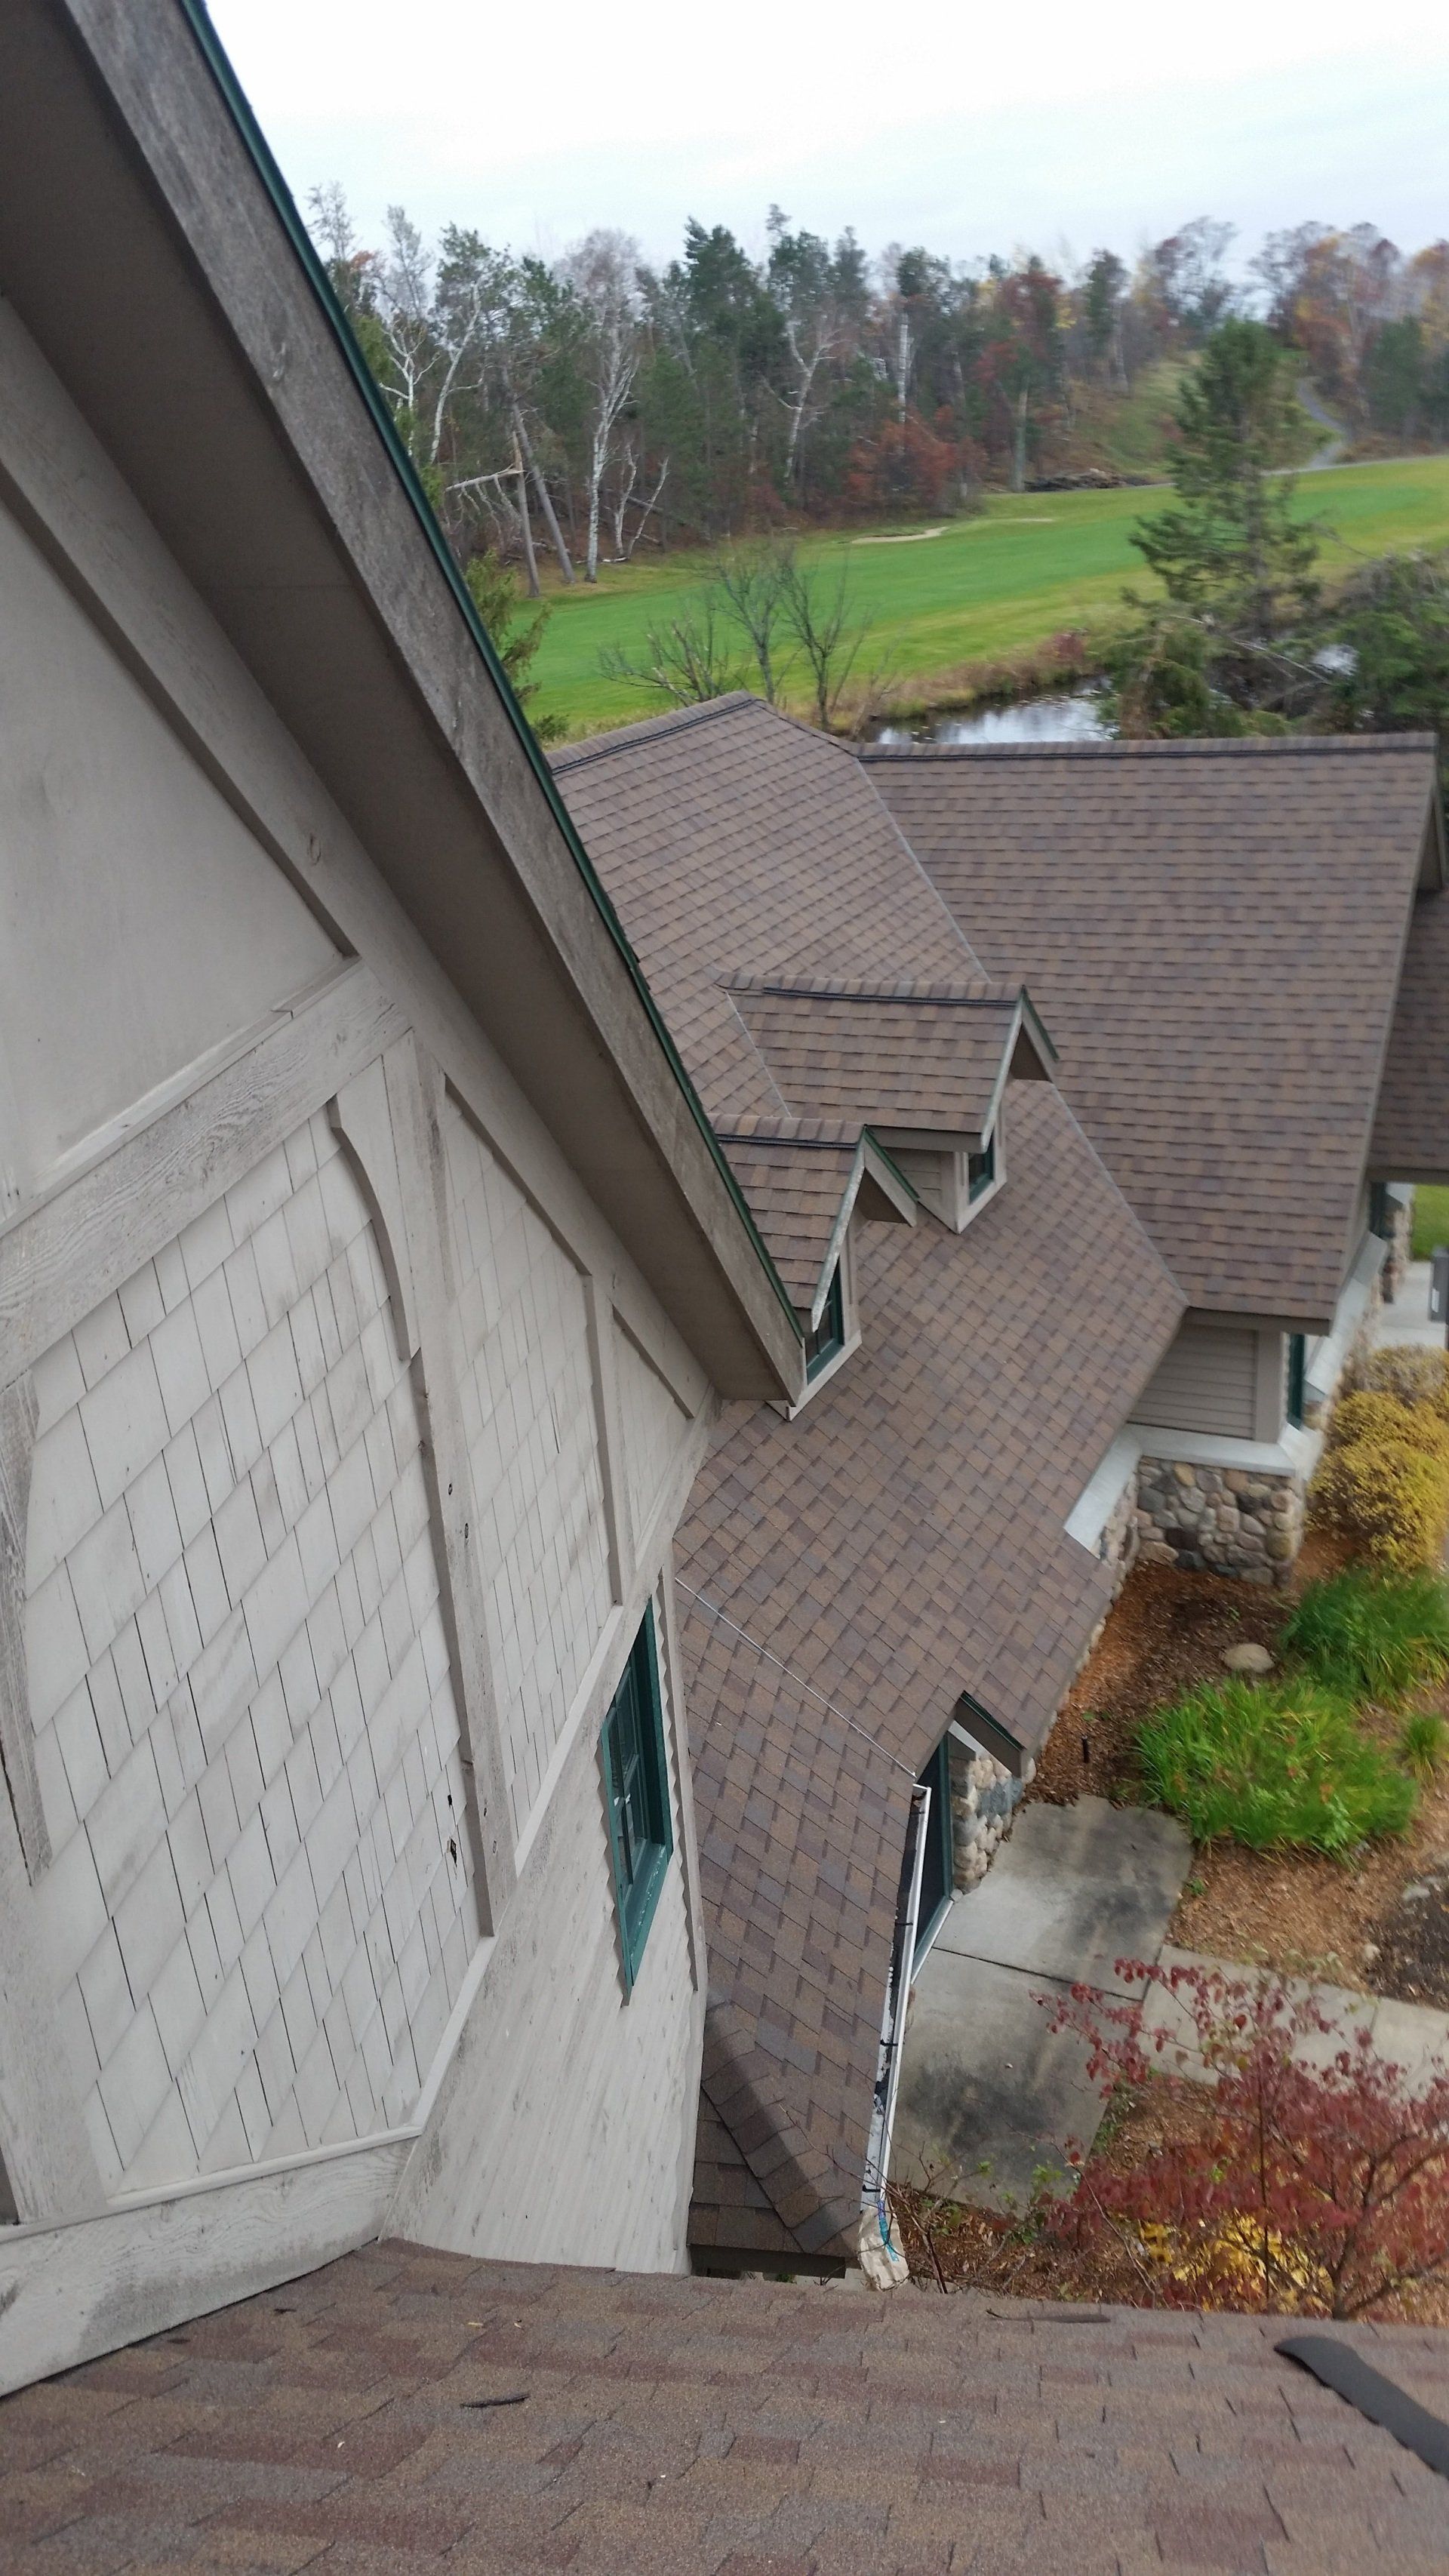 Clay Plain Tiled Roof Installation - New Richland, MN - Tom’s Miller’s Roofing